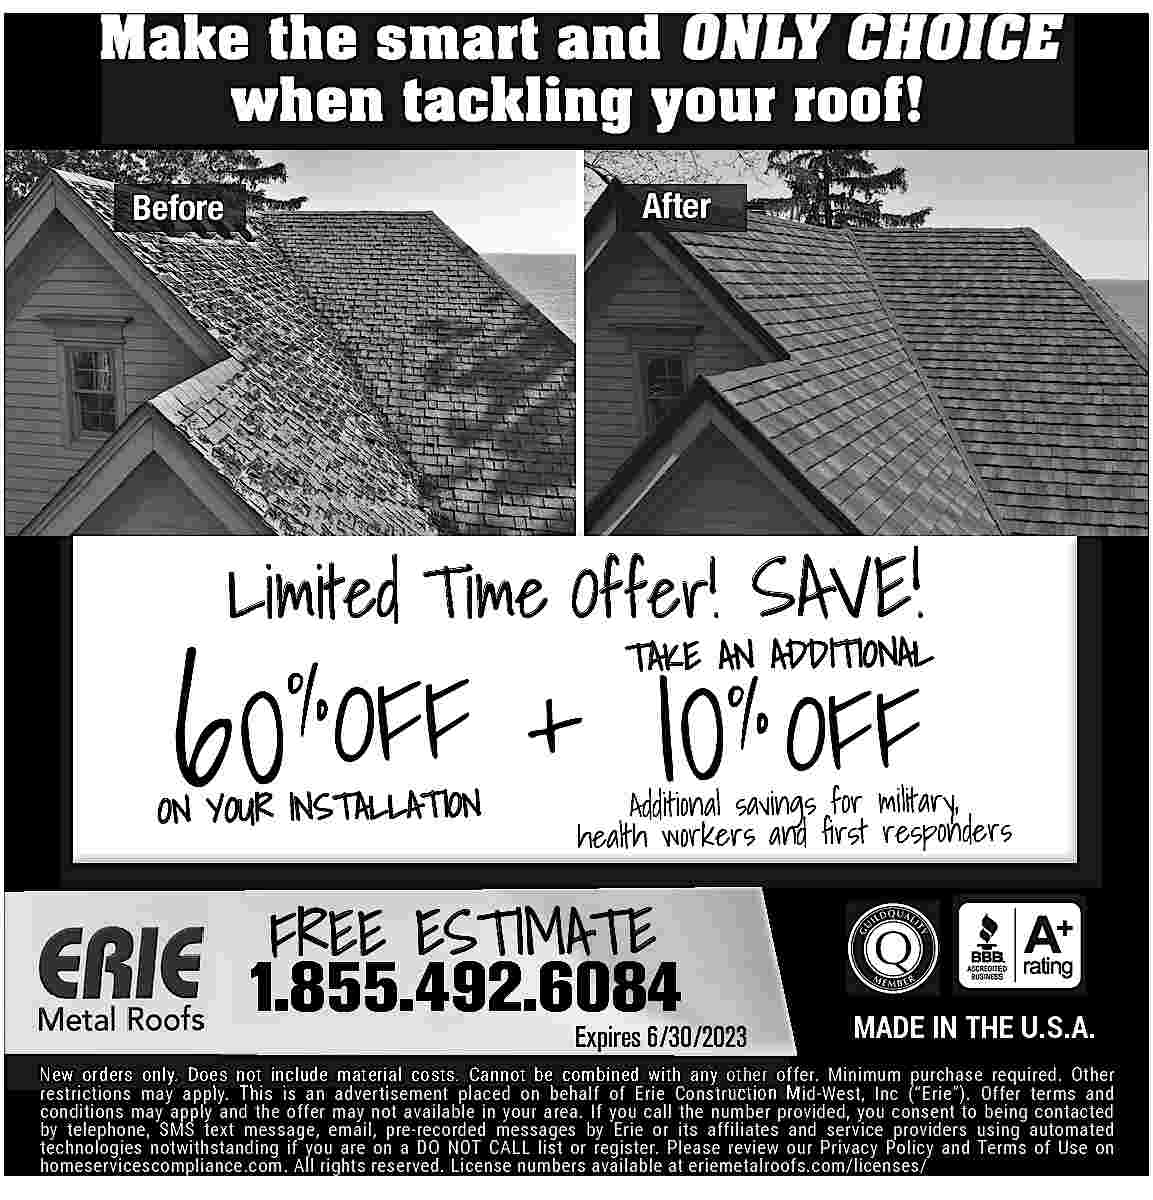 Make the smart and ONLY  Make the smart and ONLY CHOICE  when tackling your roof!  After    Before    Limited Time Offer! SAVE!    60%OFF    ON YOUR INSTALLATION    10% OFF    TAKE AN ADDITIONAL    Additional savings for military,  health workers and    rst responders    FREE ESTIMATE    1.855.492.6084    Expires 6/30/2023    MADE IN THE U.S.A.    New orders only. Does not include material costs. Cannot be combined with any other offer. Minimum purchase required. Other  restrictions may apply. This is an advertisement placed on behalf of Erie Construction Mid-West, Inc (   Erie   ). Offer terms and  conditions may apply and the offer may not available in your area. If you call the number provided, you consent to being contacted  by telephone, SMS text message, email, pre-recorded messages by Erie or its affiliates and service providers using automated  technologies notwithstanding if you are on a DO NOT CALL list or register. Please review our Privacy Policy and Terms of Use on  homeservicescompliance.com. All rights reserved. License numbers available at eriemetalroofs.com/licenses/     